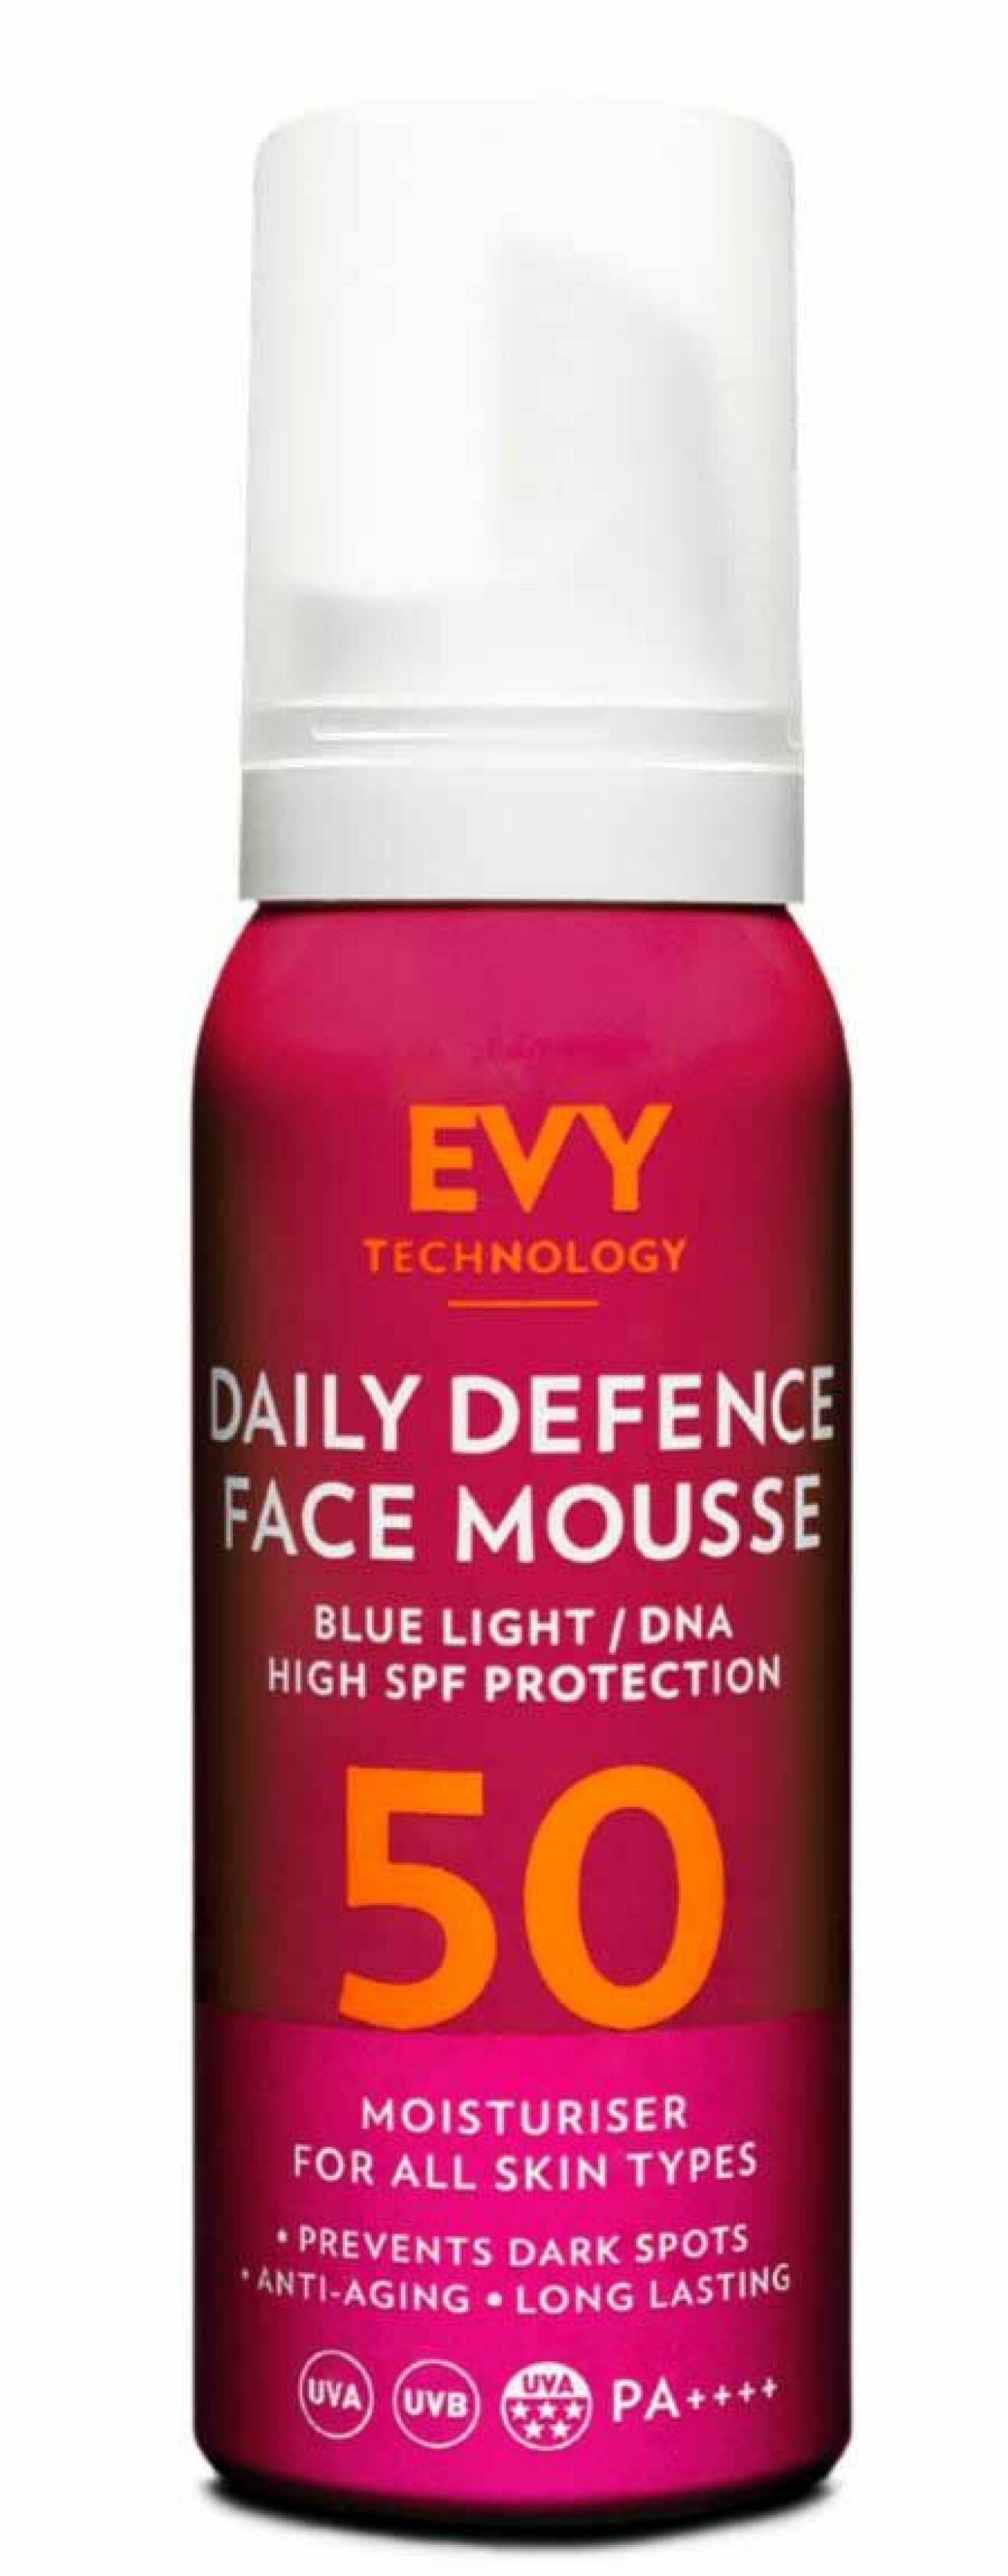 Daily Defence Mousse SPF 50 från Evy Technology.